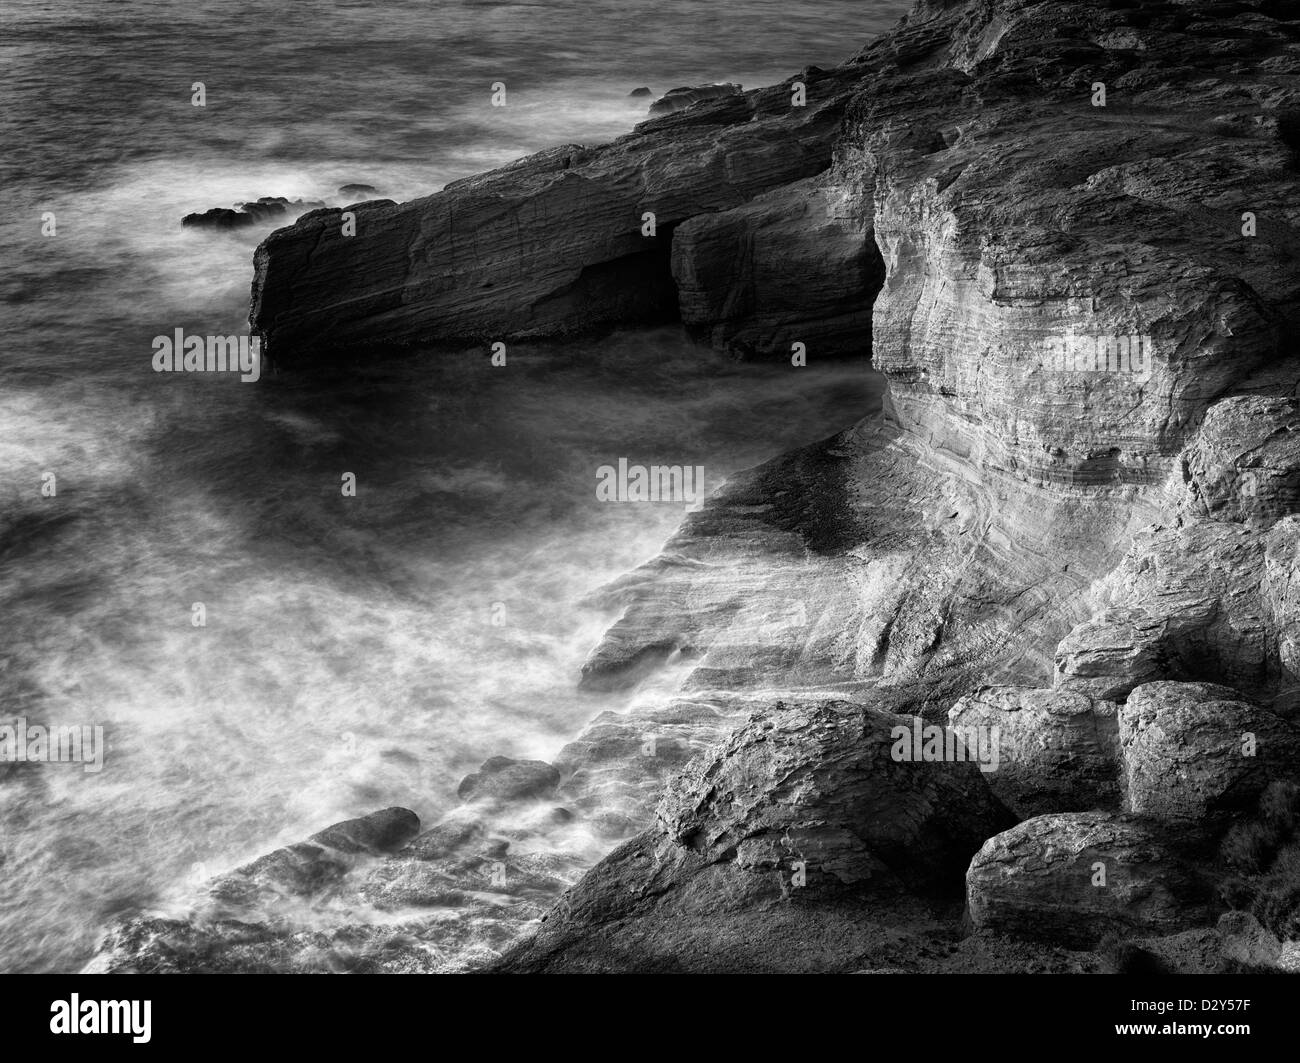 Rock formations and waves at Devil's Punchbowl, Oregon Stock Photo